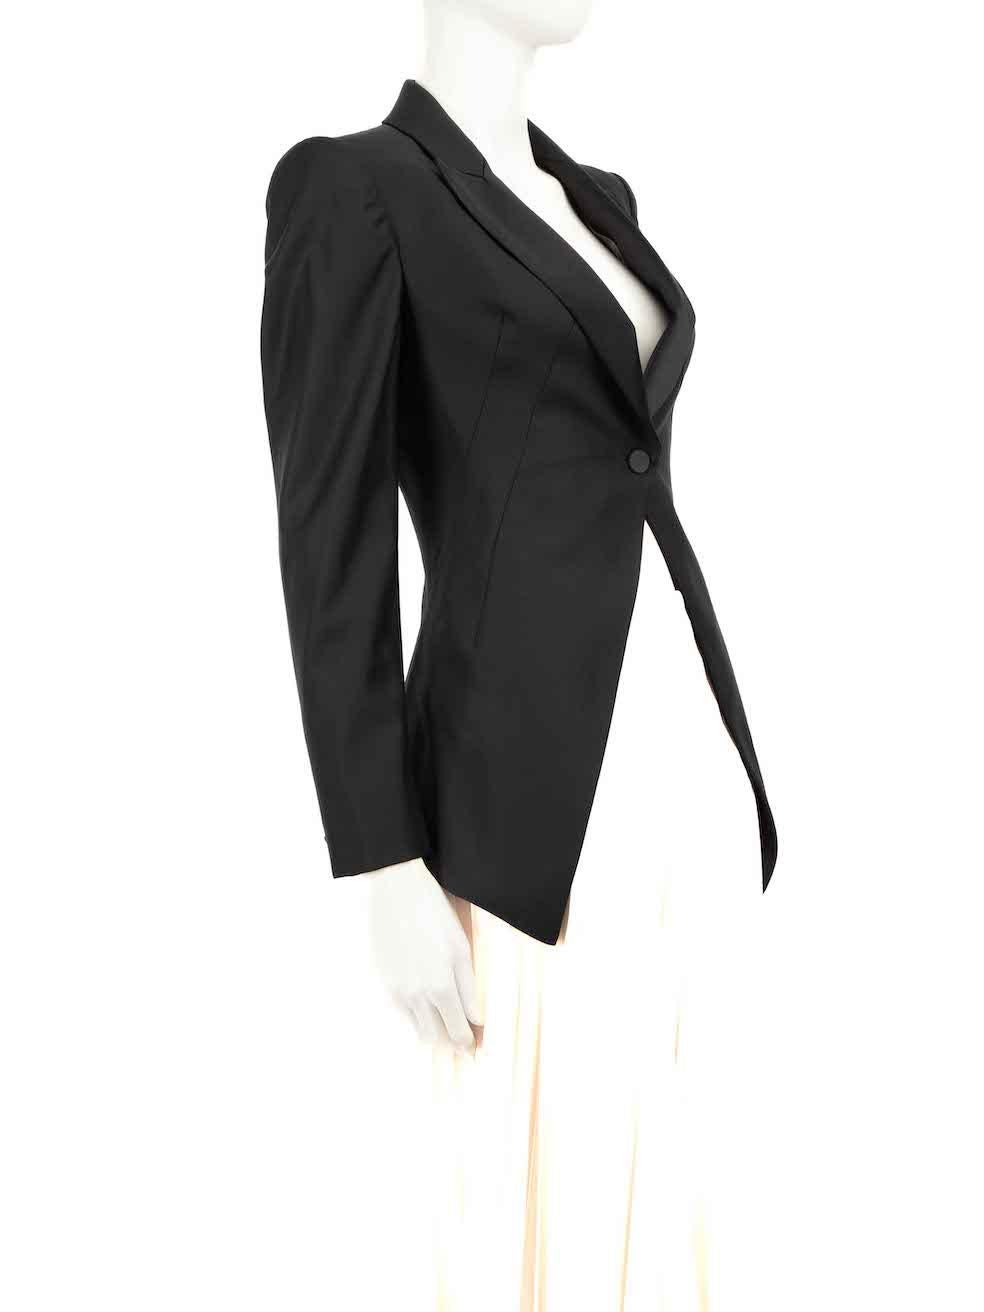 CONDITION is Very good. Minimal wear to blazer is evident. Small plucks to the weave of the silk lining on this used Alexander McQueen designer resale item.
 
 Details
 Black
 Wool
 Blazer
 Geometric cut detail
 Shoulder pads
 Button fastening
 2x